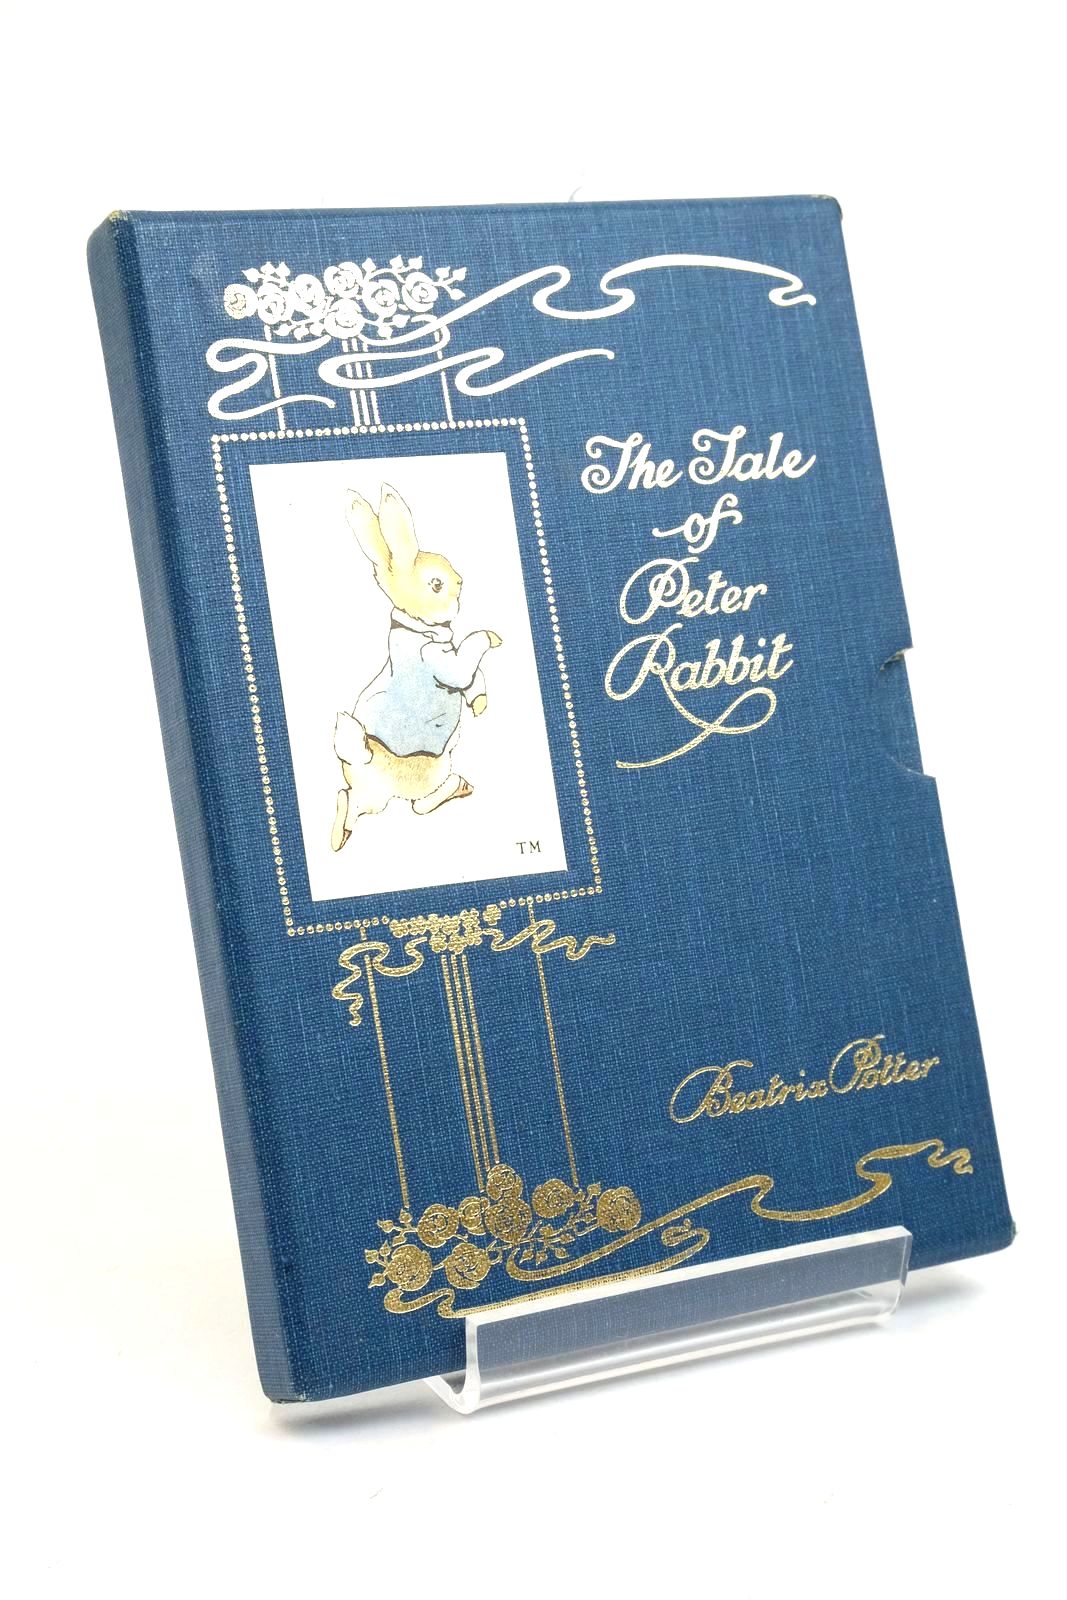 Photo of THE TALE OF PETER RABBIT- Stock Number: 1322406